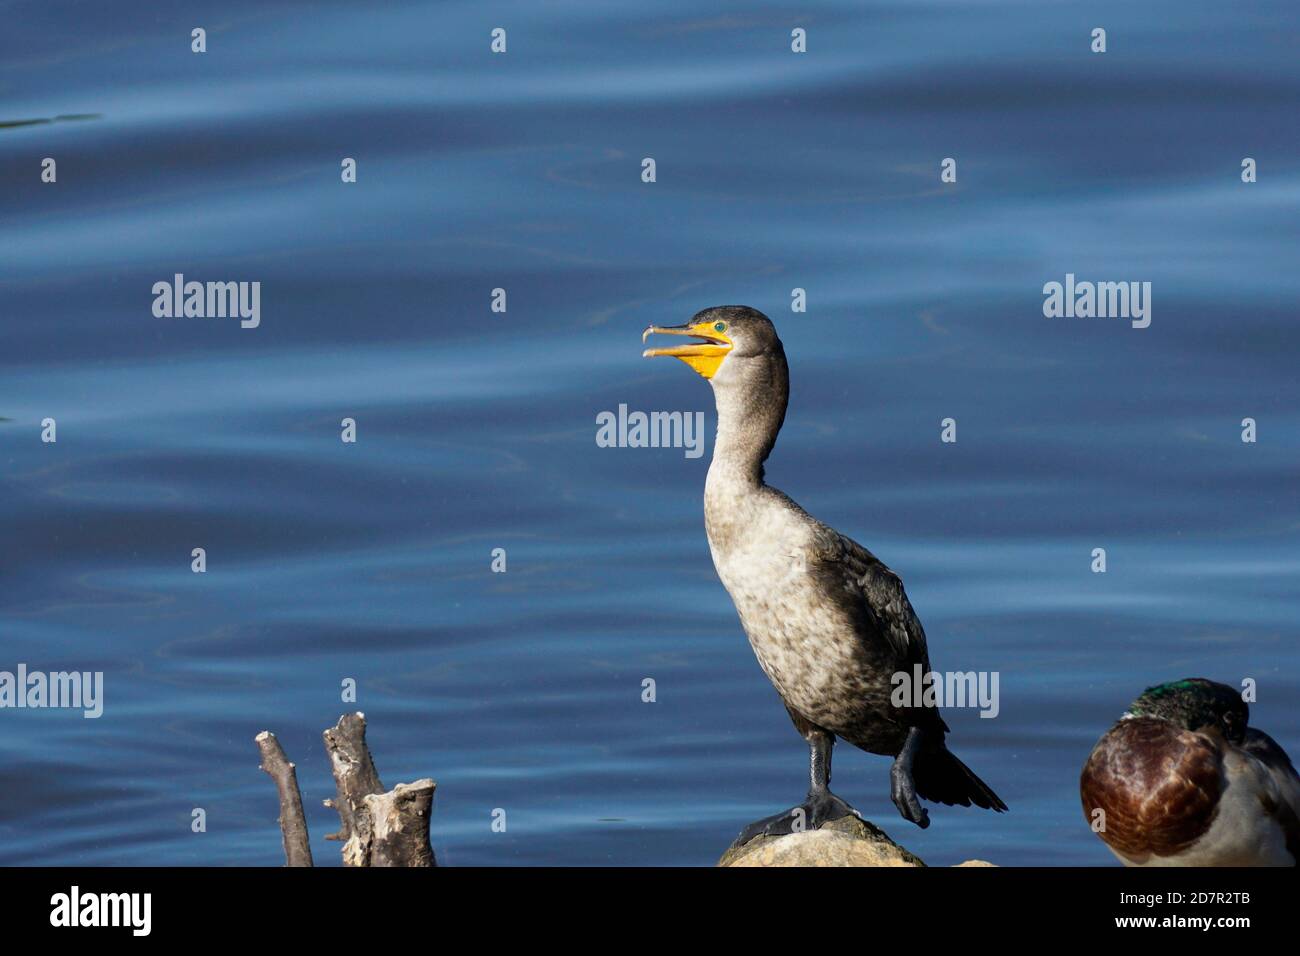 Juvenile Double-Crested Cormorant at the water's edge Stock Photo